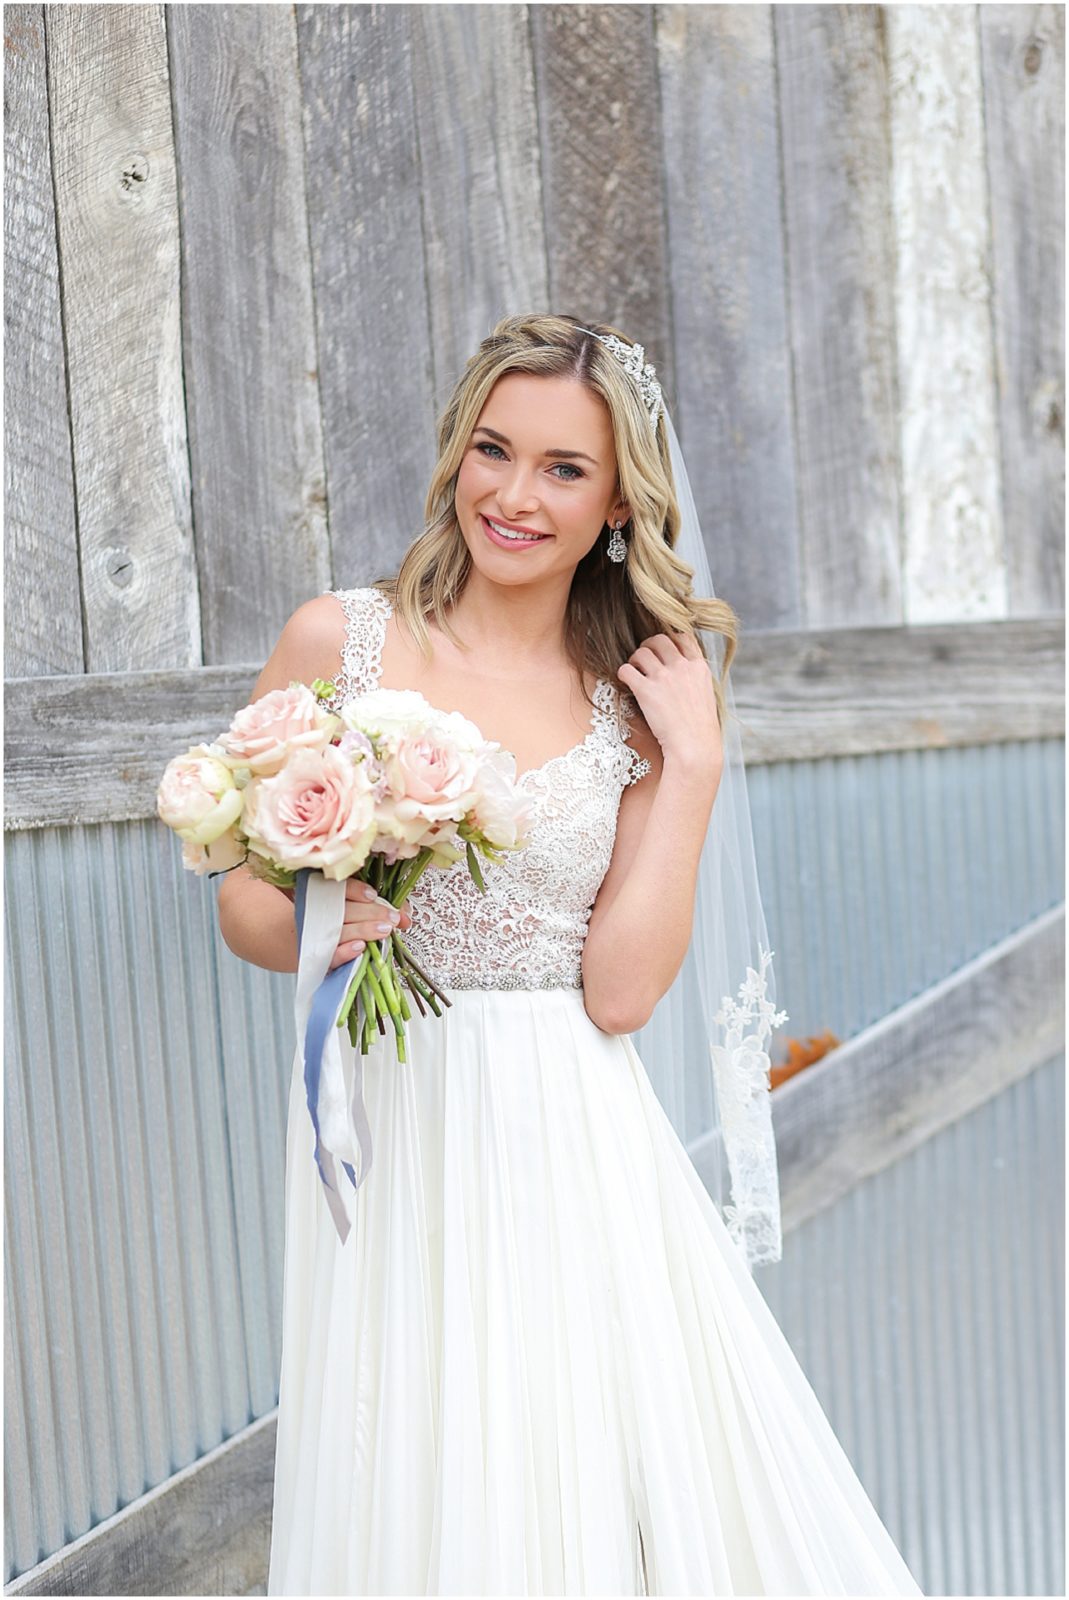 LACE WEDDING DRESS ON BEAUTIFUL BRIDE AT THE BARN AT RIVERBEND - BARN WEDDING  IN KANSAS CITY - ALL PHOTOS BY MARIAM SAIFAN PHOTOGRAPHY - BLUE BOUQUET - BLUSH FLOWERS